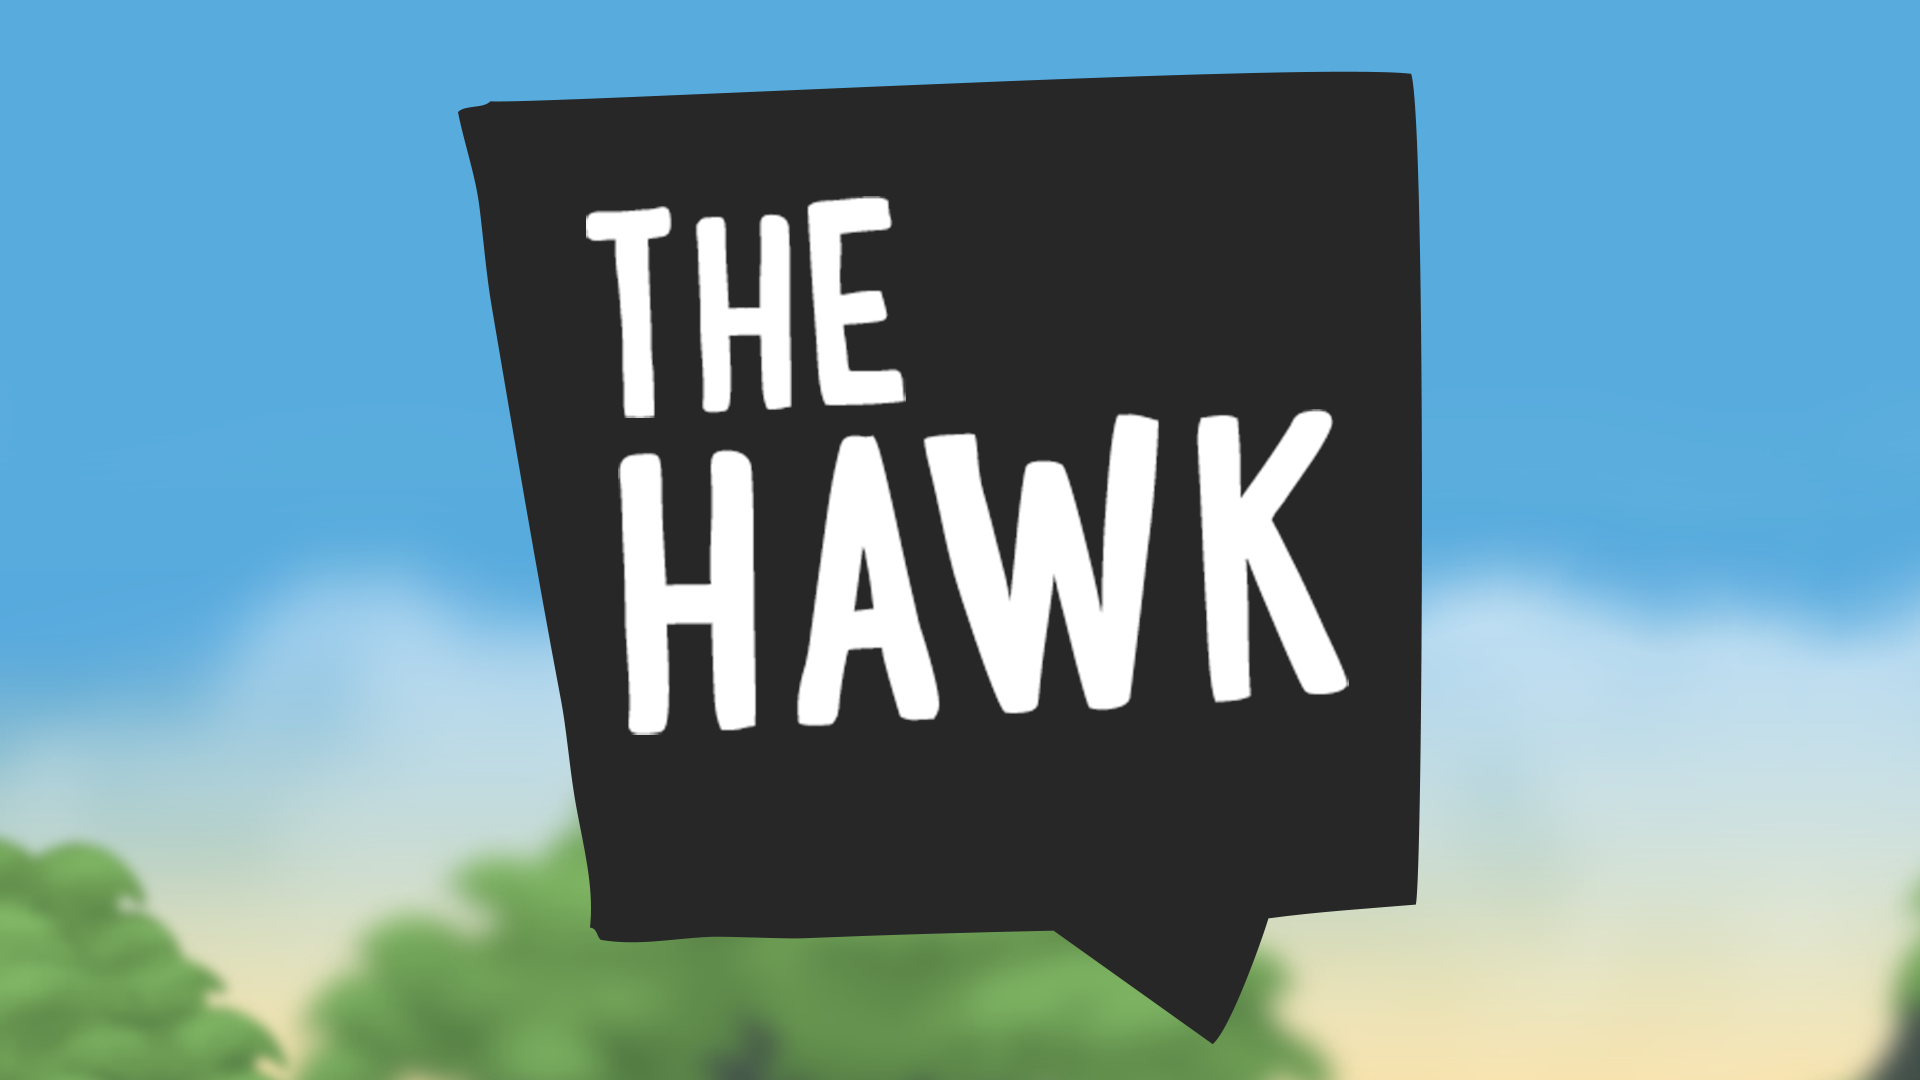 Icon for The Chase Hawk